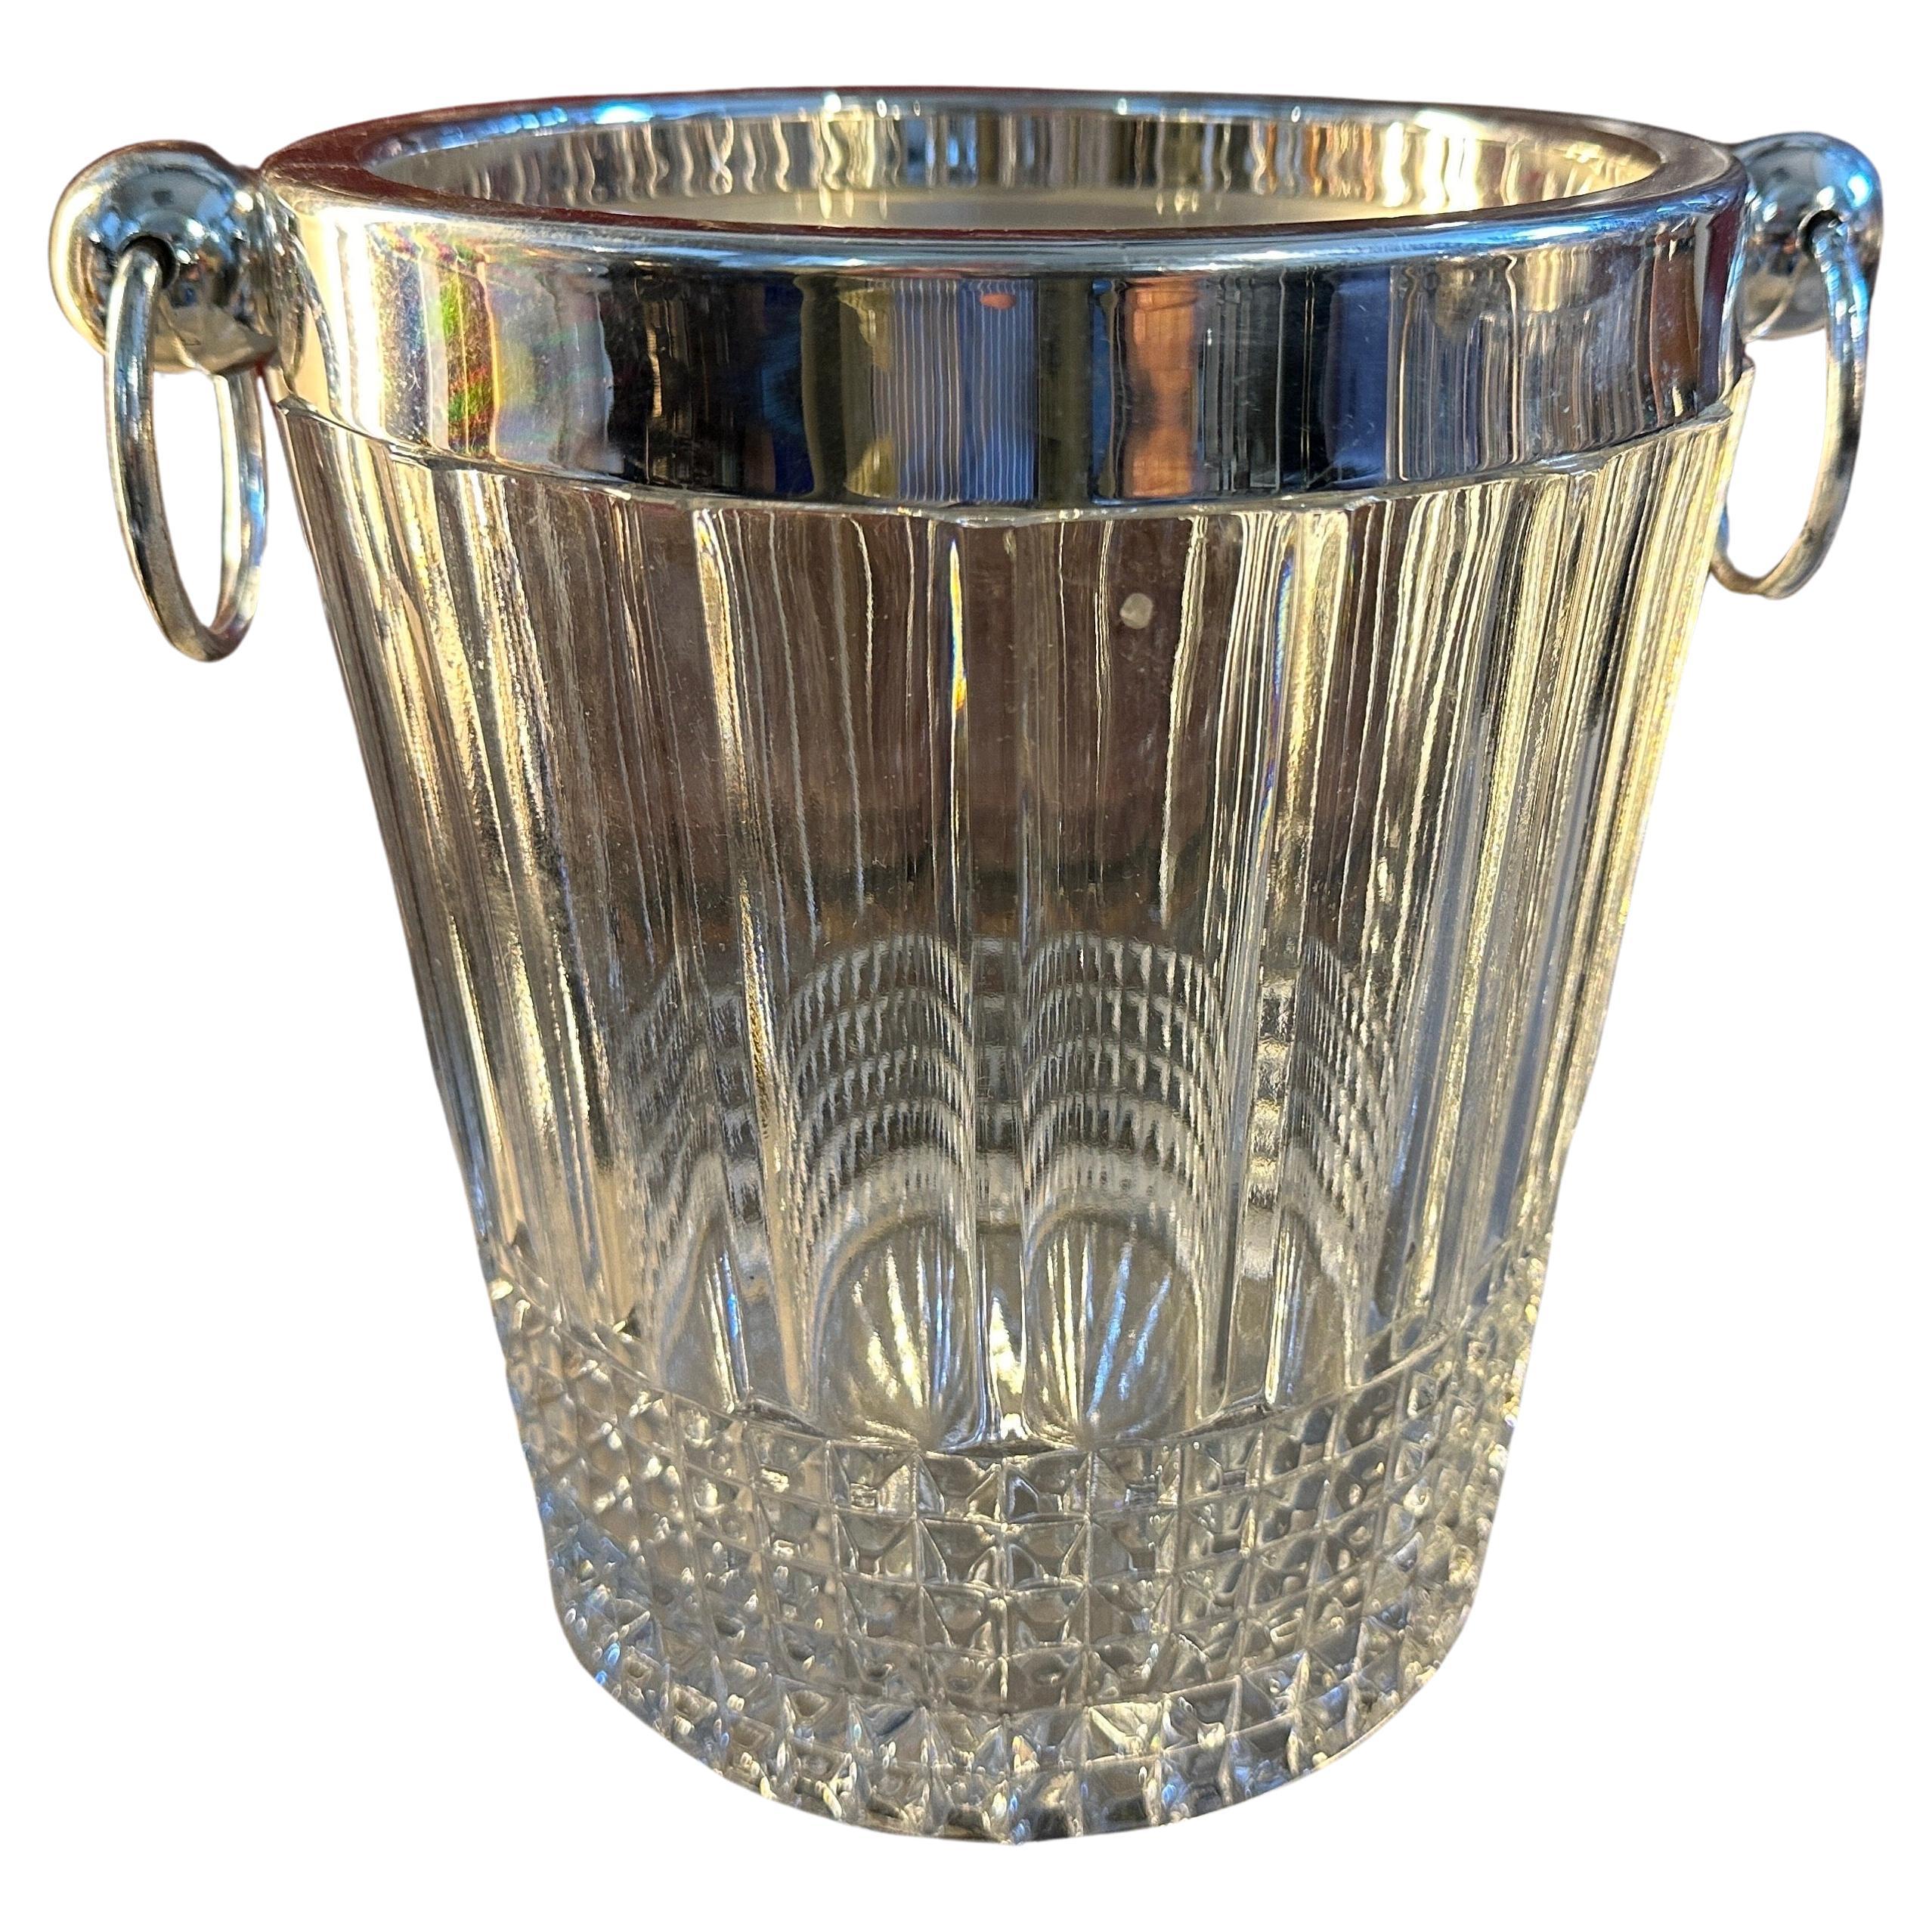 A pair of 1950s Modernist Wine Coolers designed and manufactured in France, high quality heavy crystal and silver plate are in perfect conditions. They exemplify the epitome of sophistication and elegance and showcase a seamless blend of crystal and